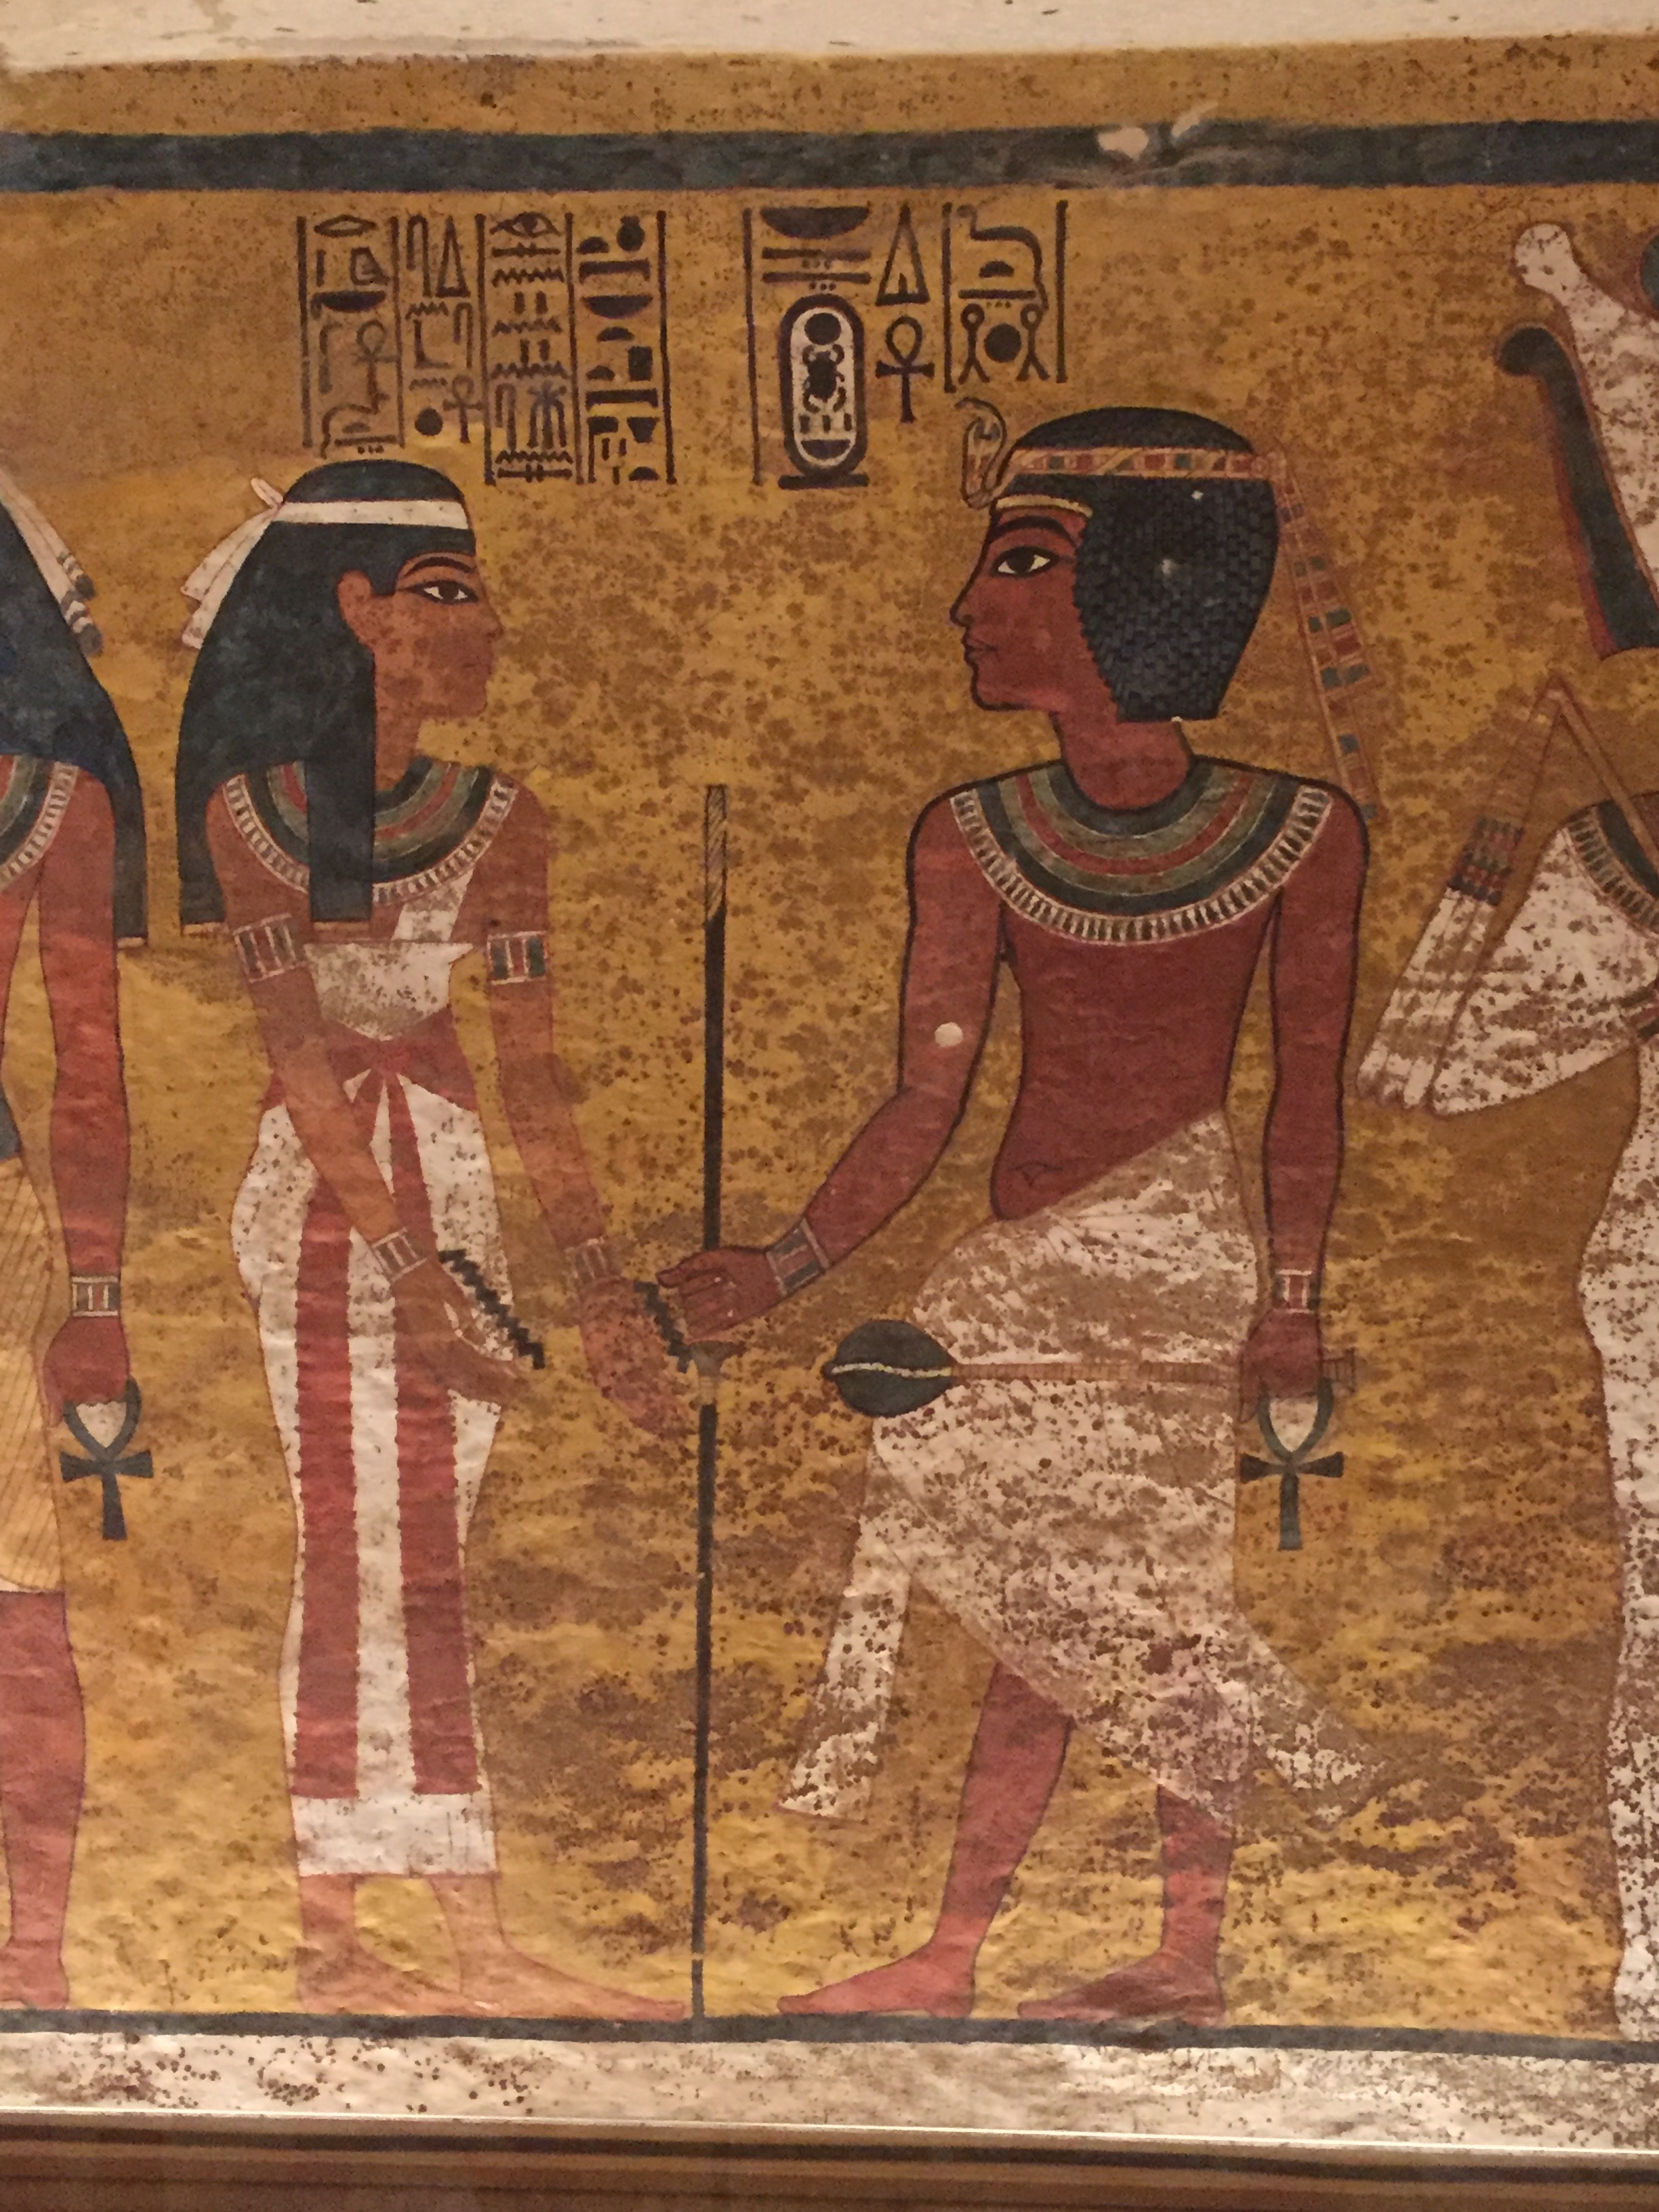  Tutankhamun, depicted in the form of a living king, being welcomed into the realm of the gods by the goddess Nut.&nbsp;  Image © J. Paul Getty Trust, 2017 